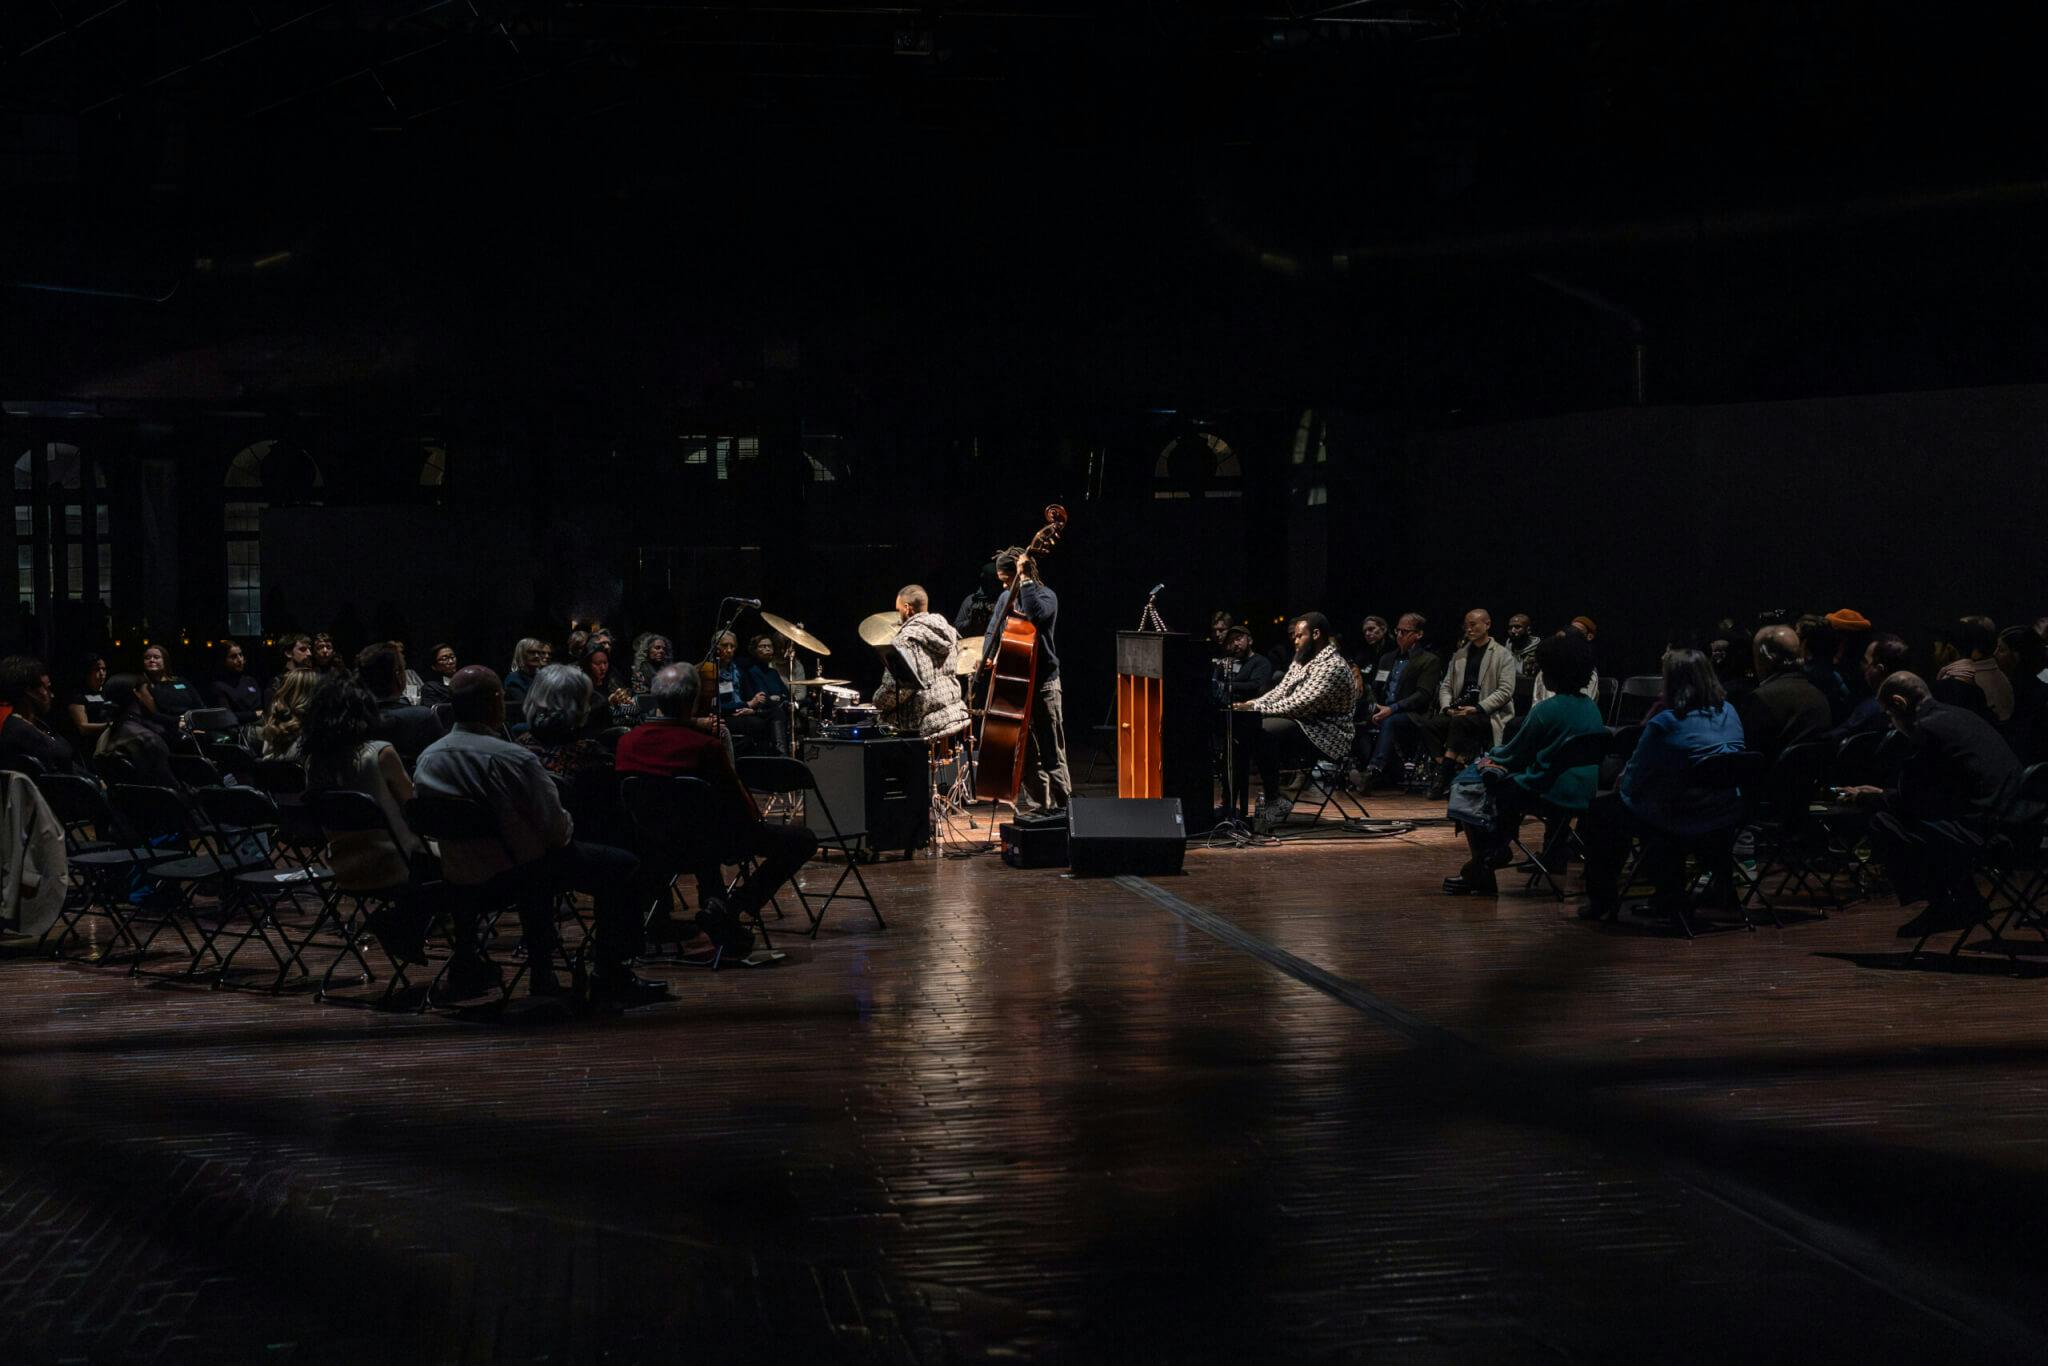 Musicians perform around a clustered audience in a darkened room.